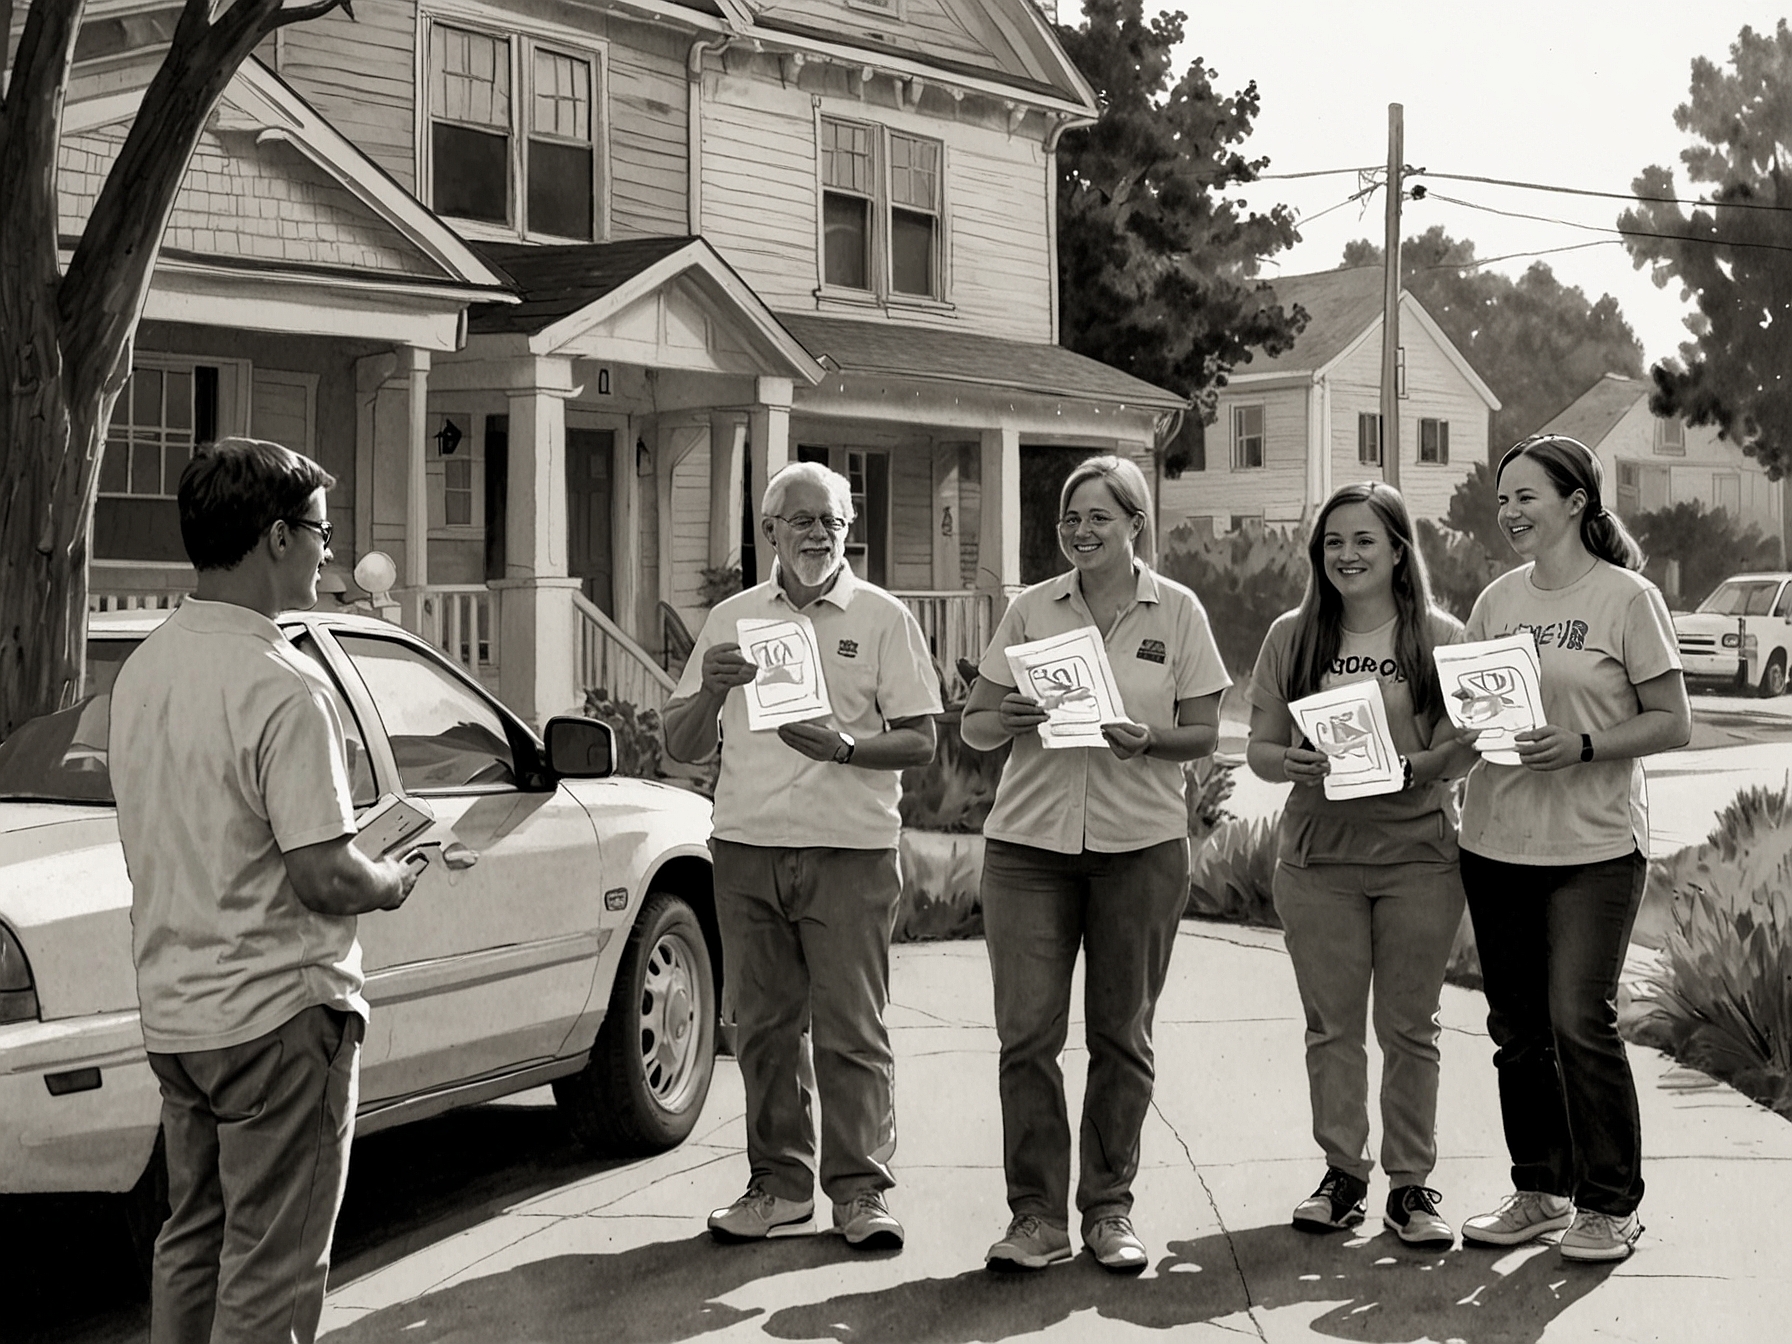 Volunteers canvassing neighborhoods in Auburn, engaging with local residents and distributing campaign materials to boost awareness and support for Democratic candidates.